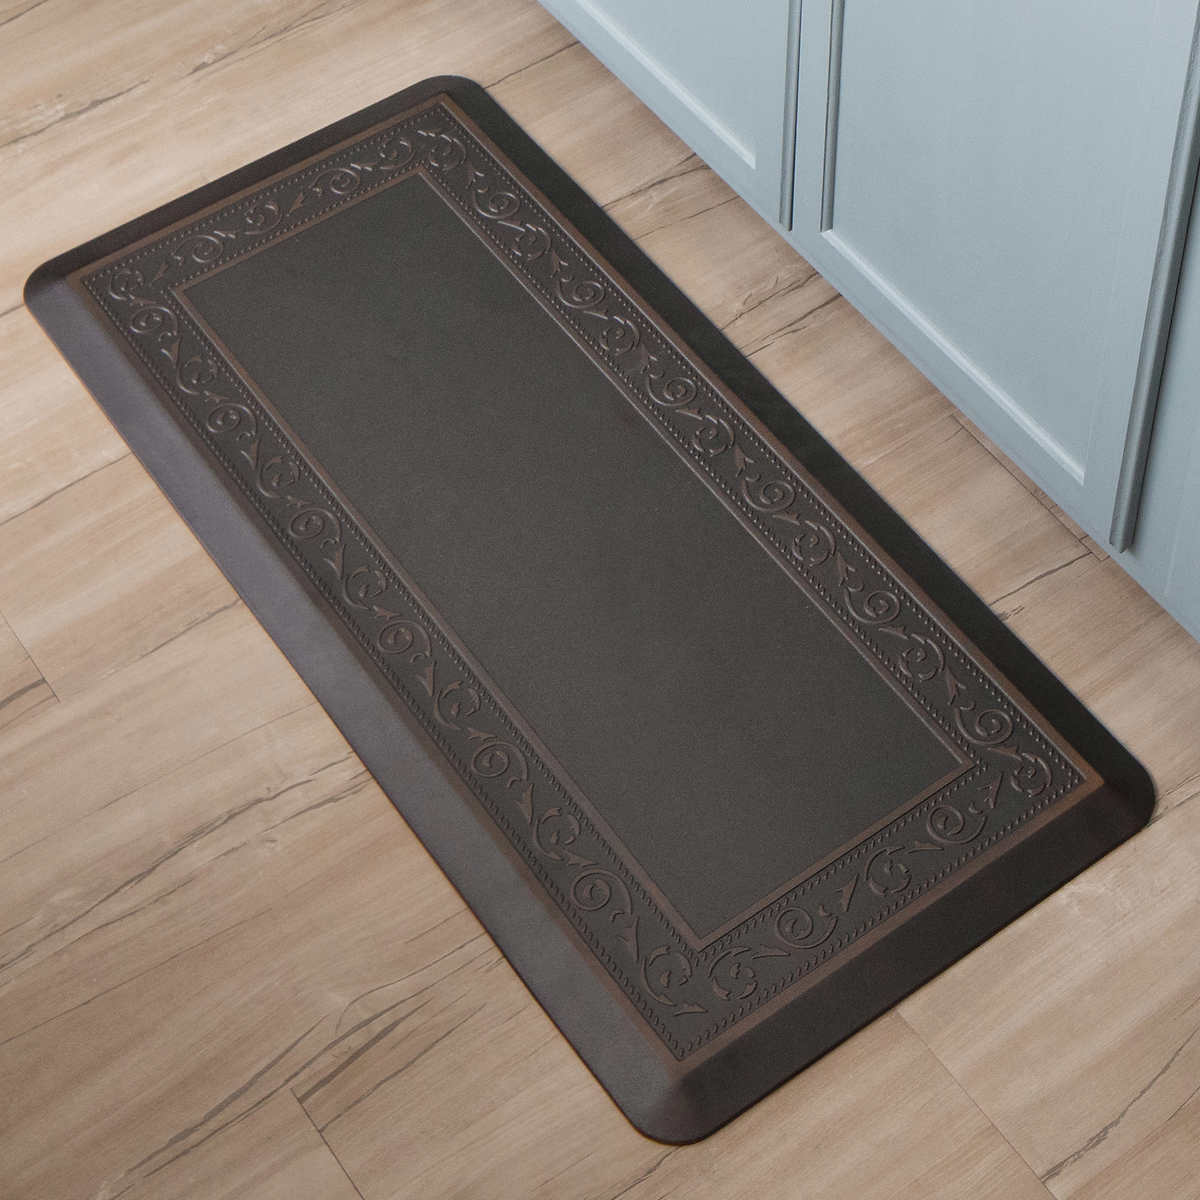 The 10 Best Anti-Fatigue Mats for Home Kitchens